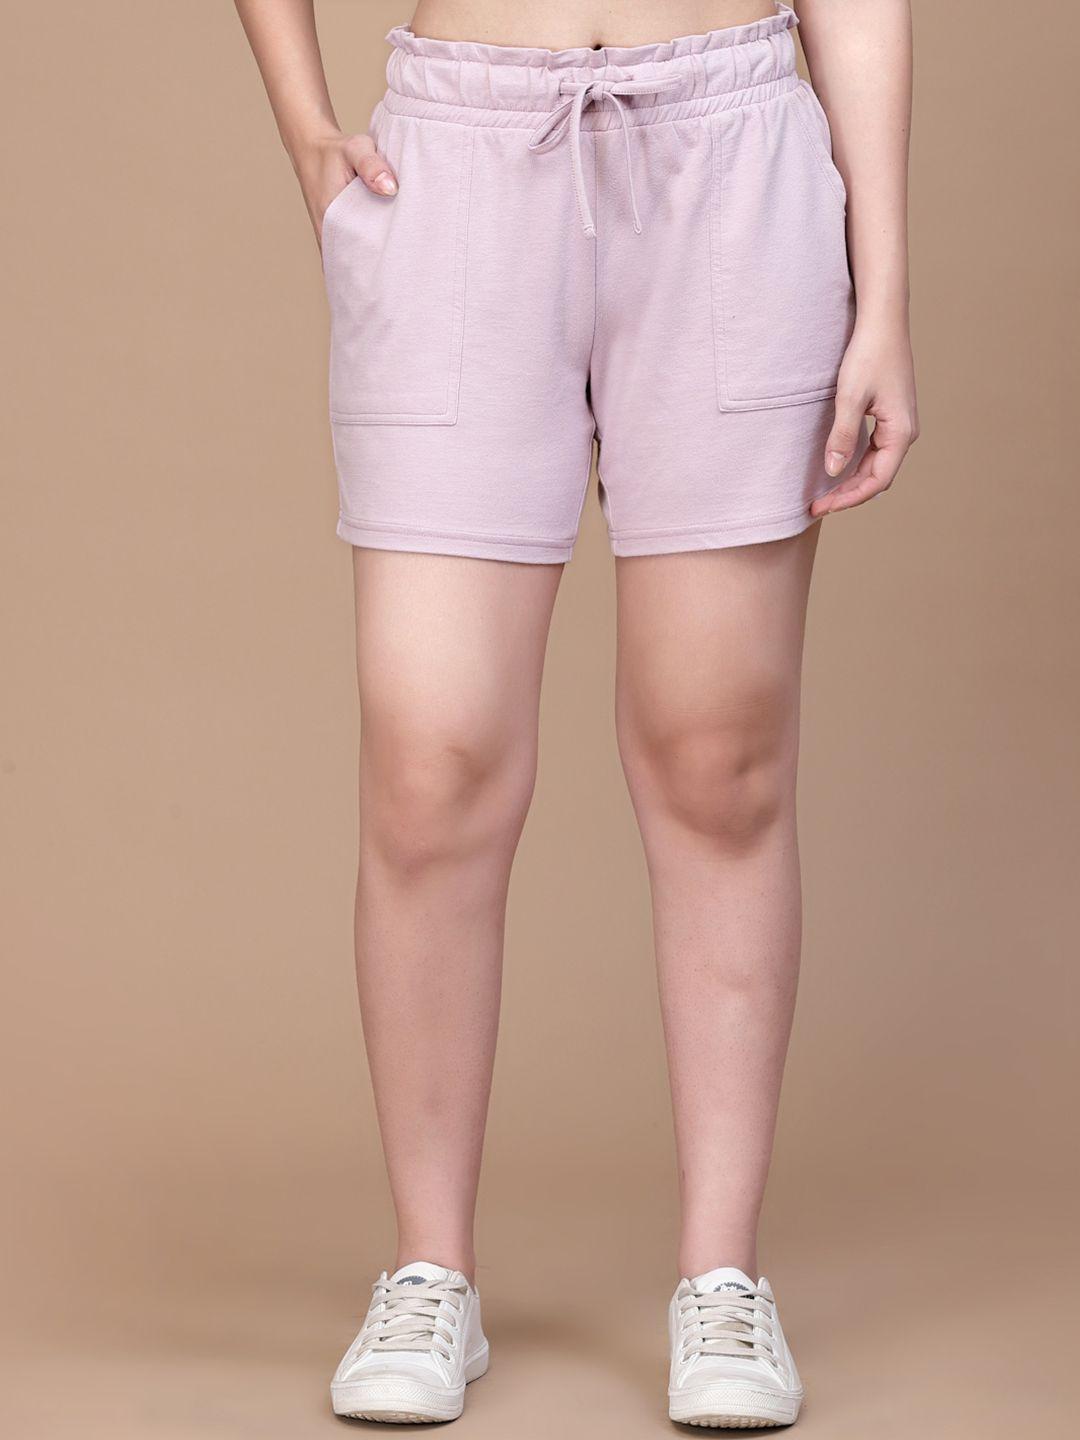 strong-and-brave-women-mid-rise-cotton-sports-shorts